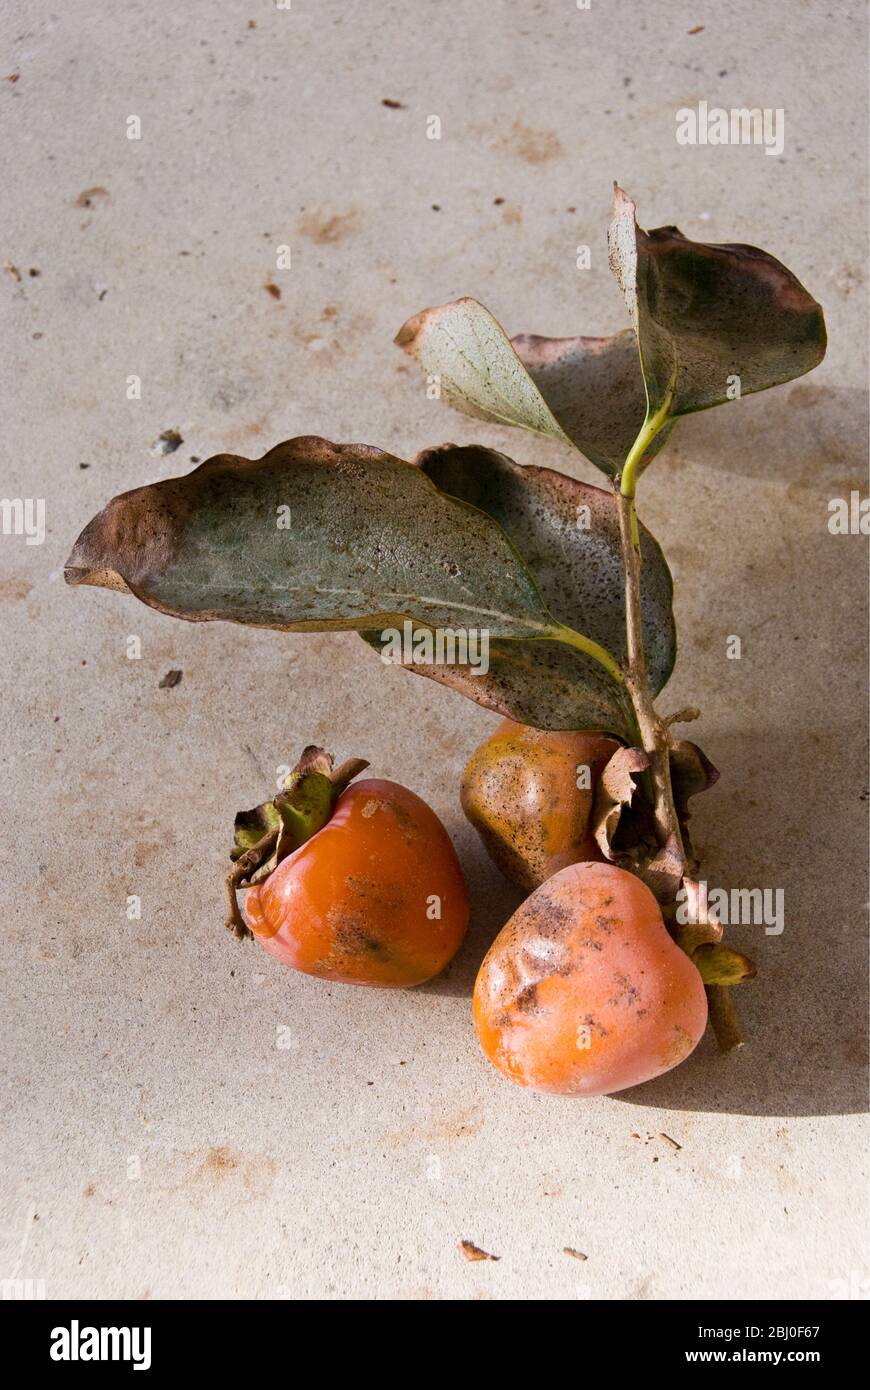 Persimmons freshly picked from the tree in southern Cyprus. - Stock Photo